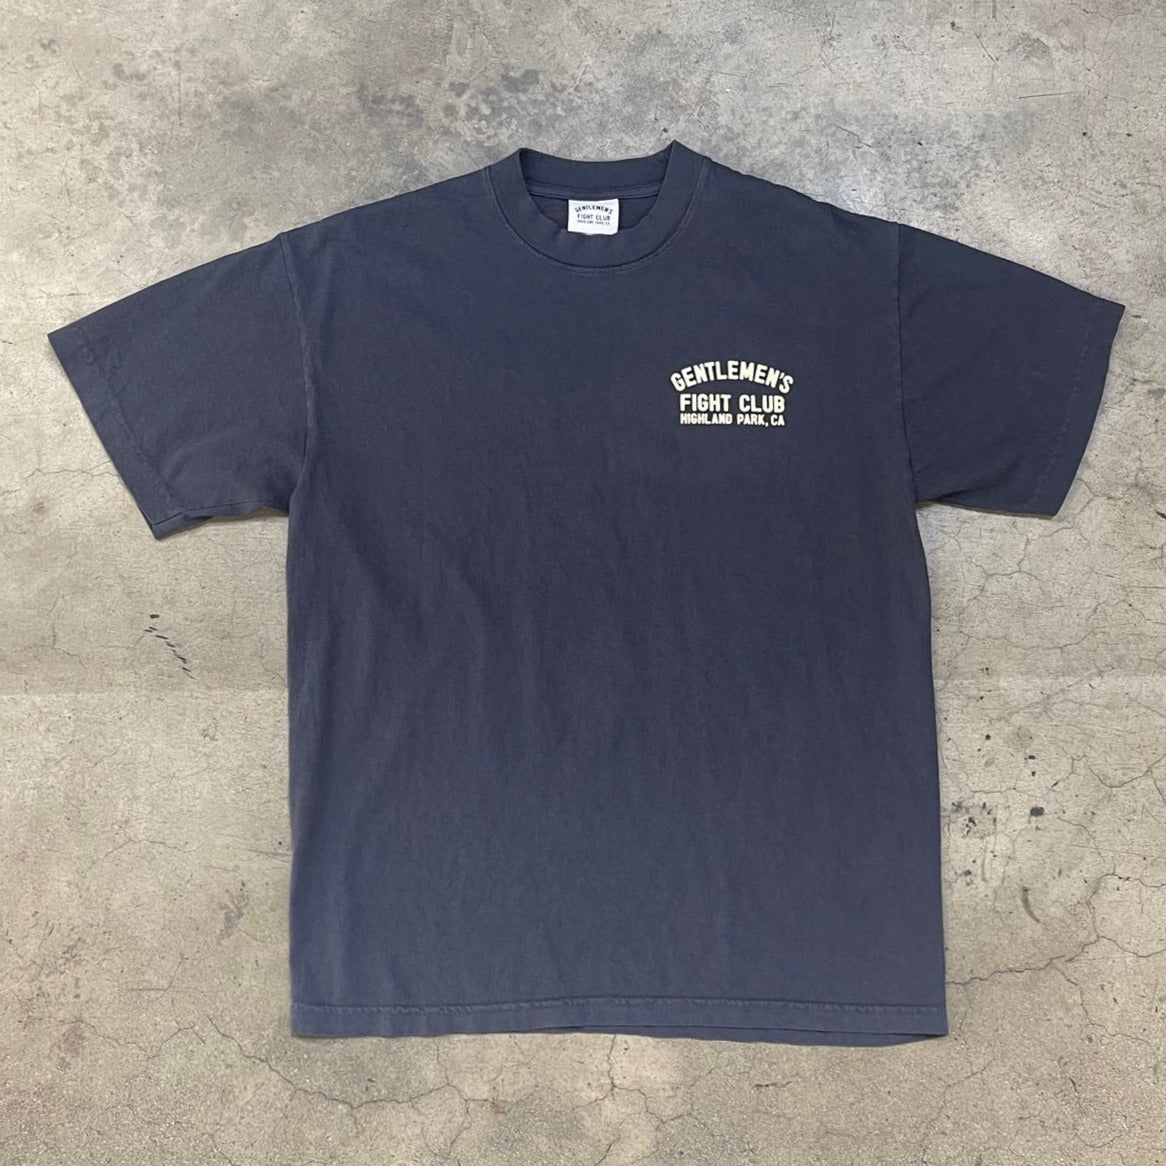 Front of dusty navy tee with creme print that reads "Gentlemen's Fight Club Highland Park, CA"